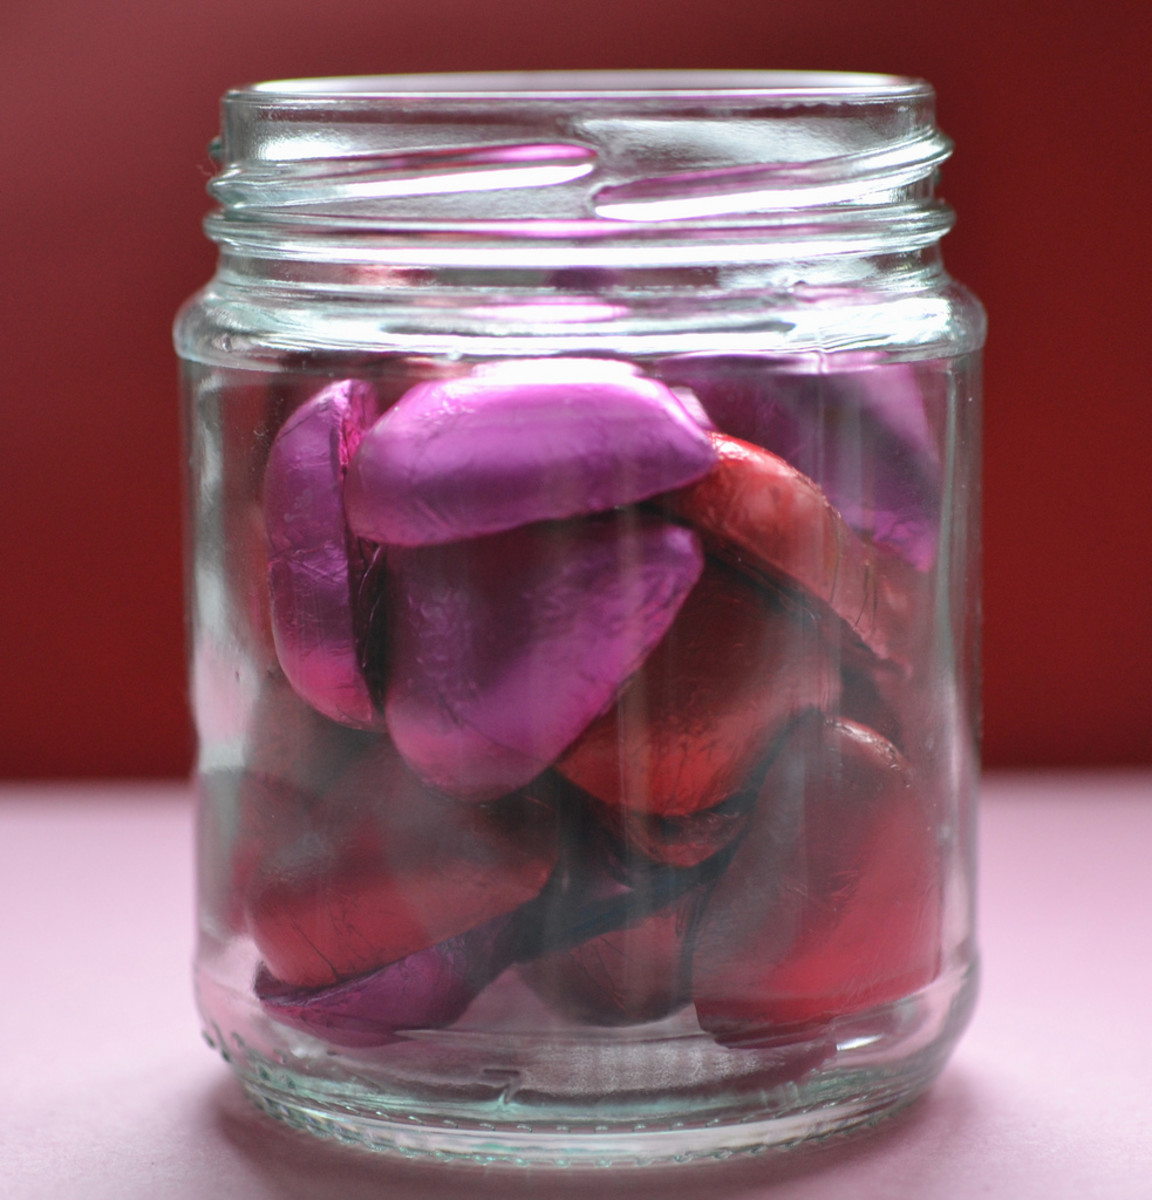 Most any candies will work well for jarred candies. Make sure to purchase something that will fit nicely into your jar. For example, you may wish to use wrapped, heart-shaped chocolates or conversation hearts. Red hots work too!